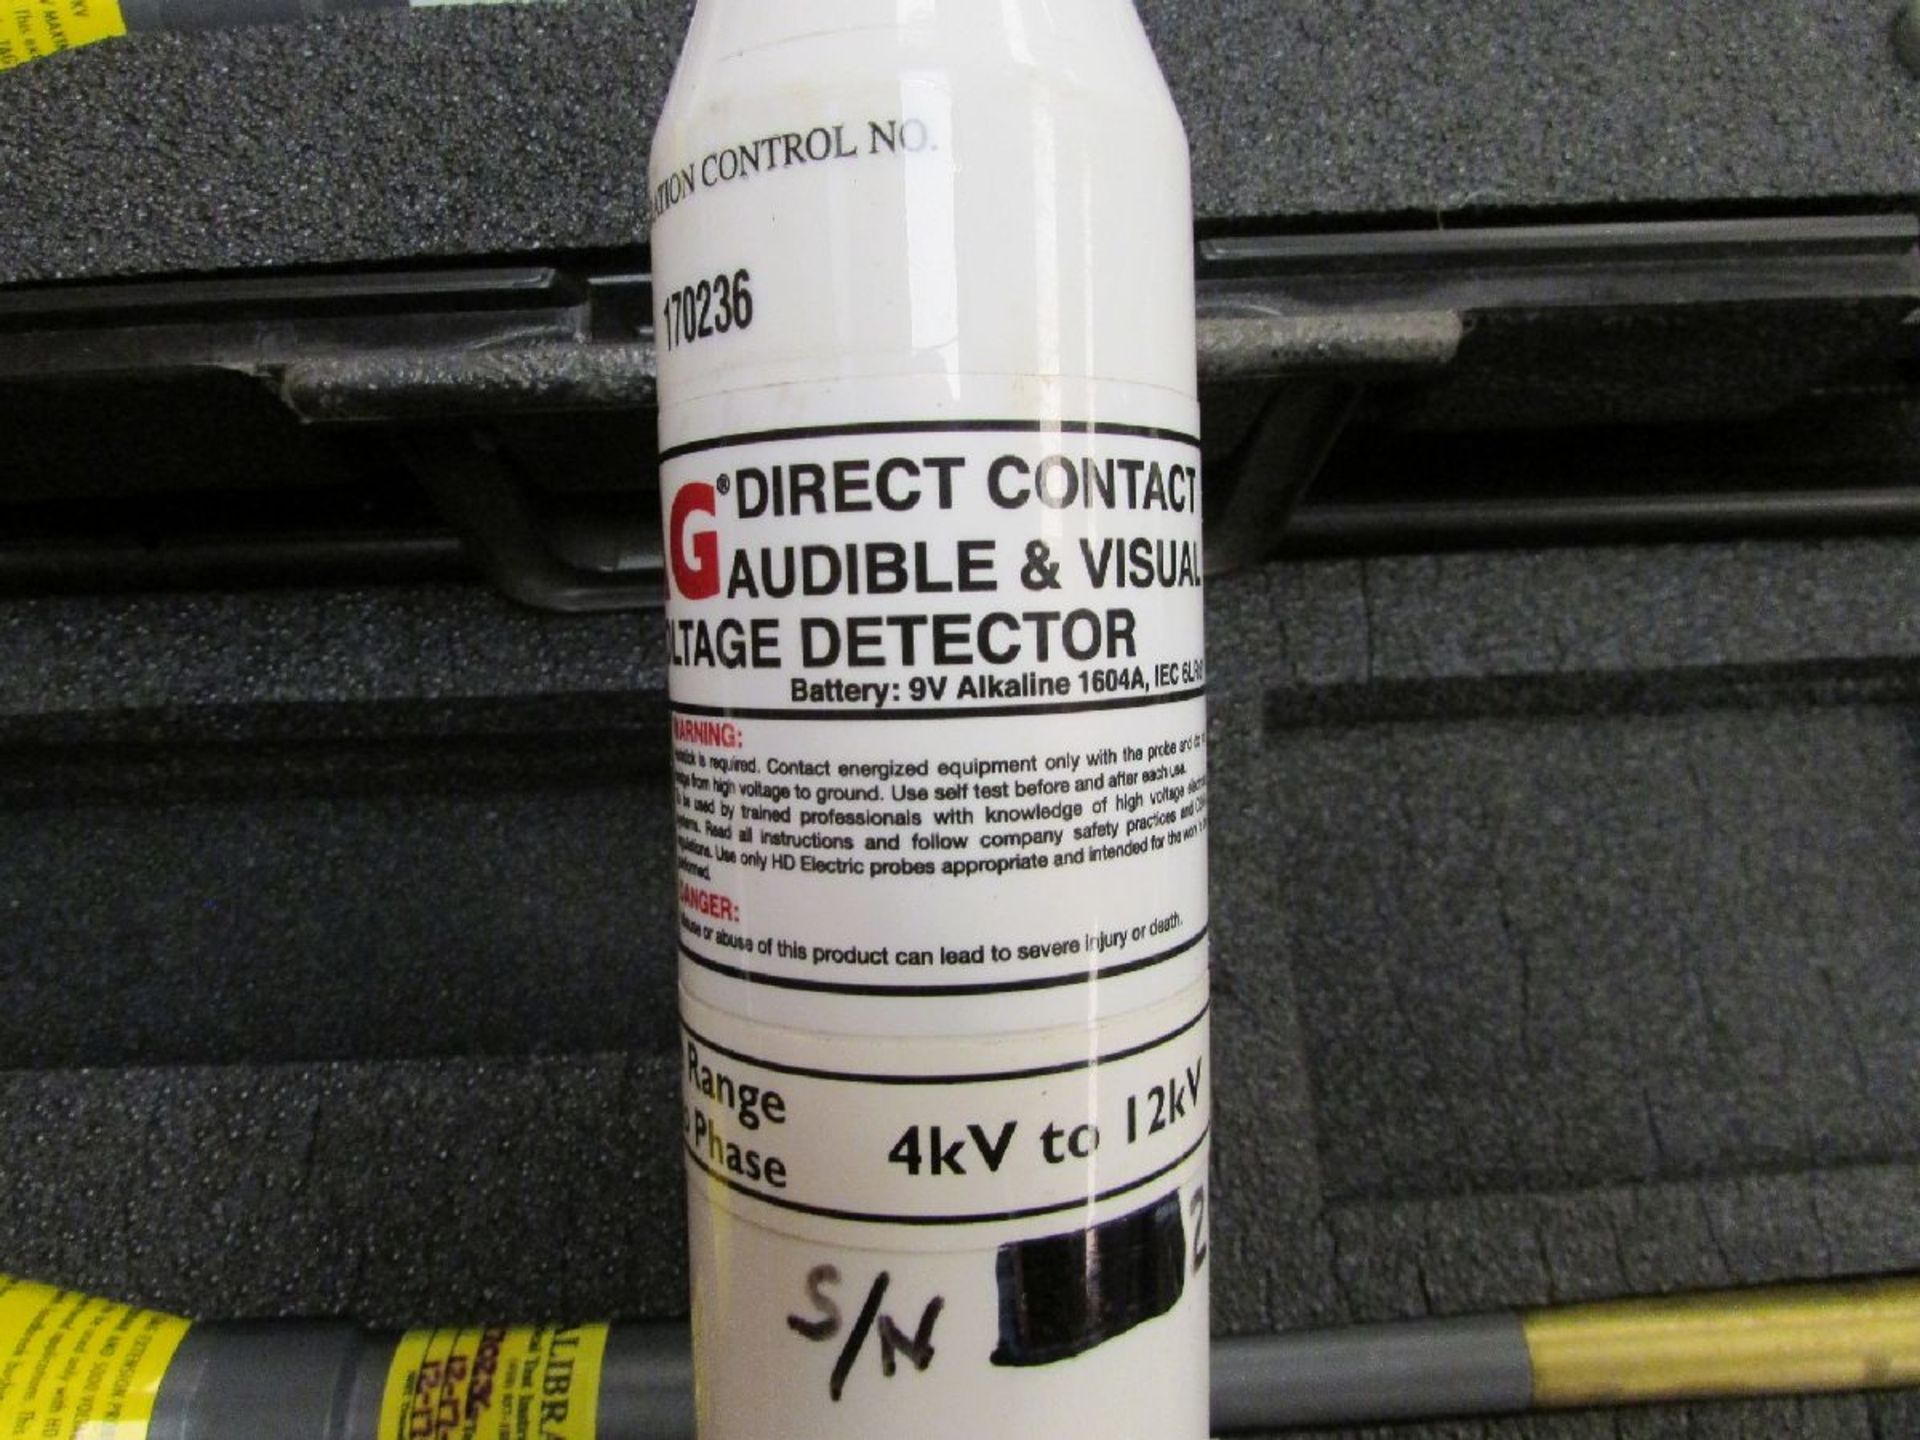 HD Electric Co. Model TAG 200 Direct Contact Audible & Visual Voltage Detectors - Image 2 of 2